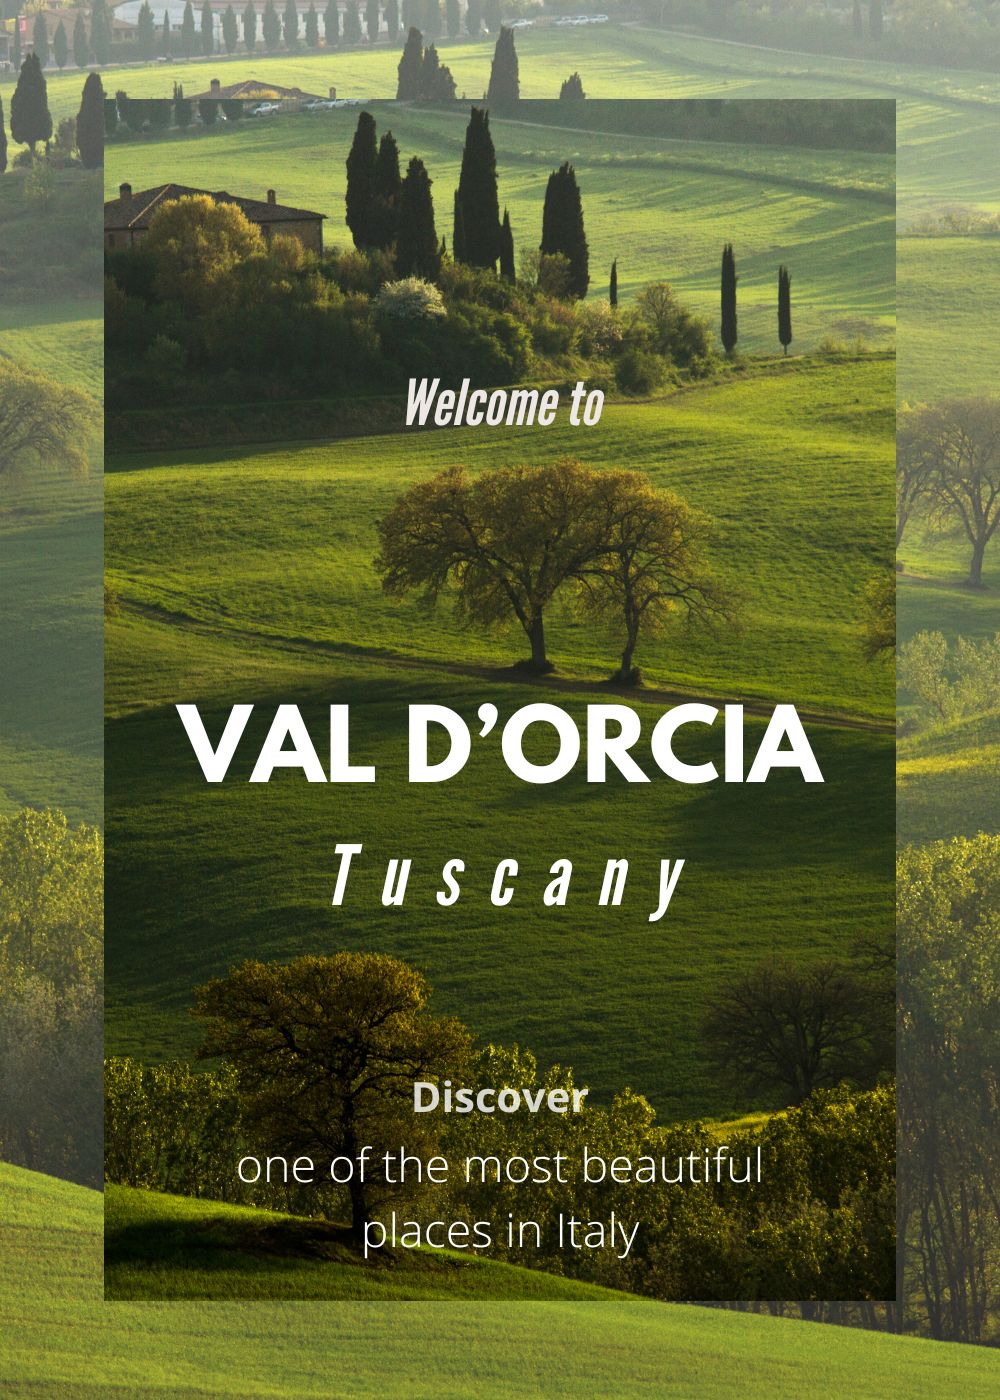 Val D Orcia in Tuscany one of the most beautiful places in Italy must visit travel destination